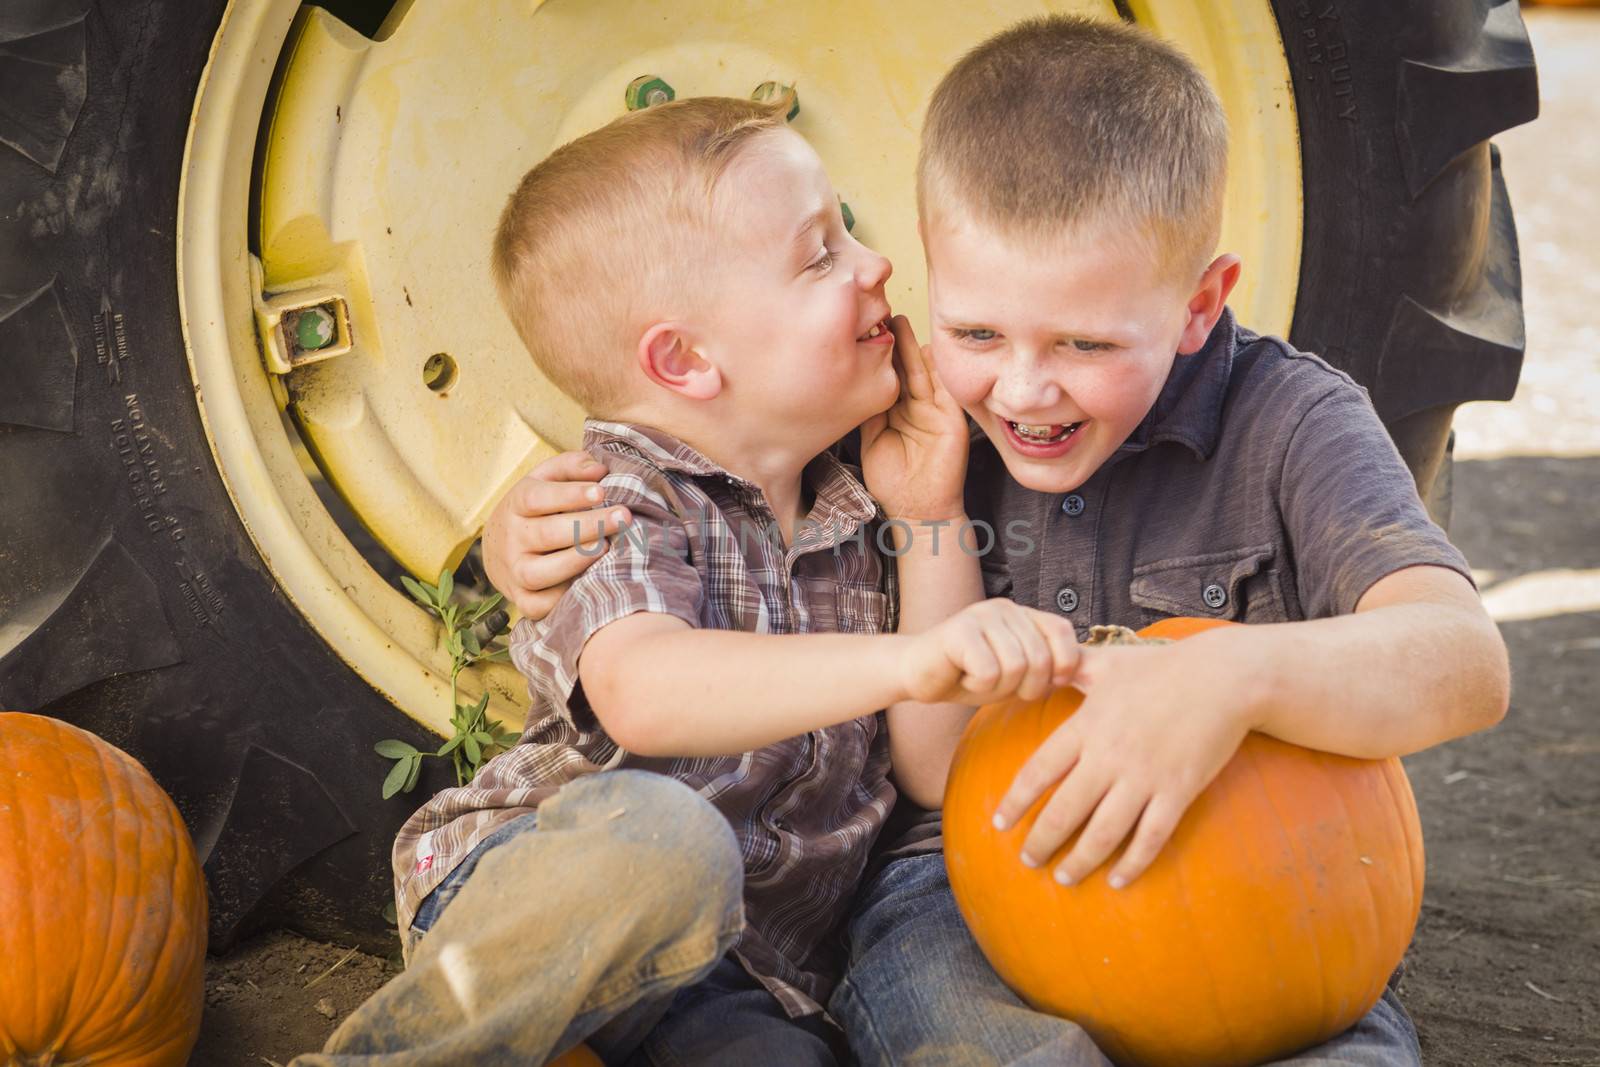 Two Boys Sitting Against Tractor Tire Holding Pumpkins Whisperin by Feverpitched